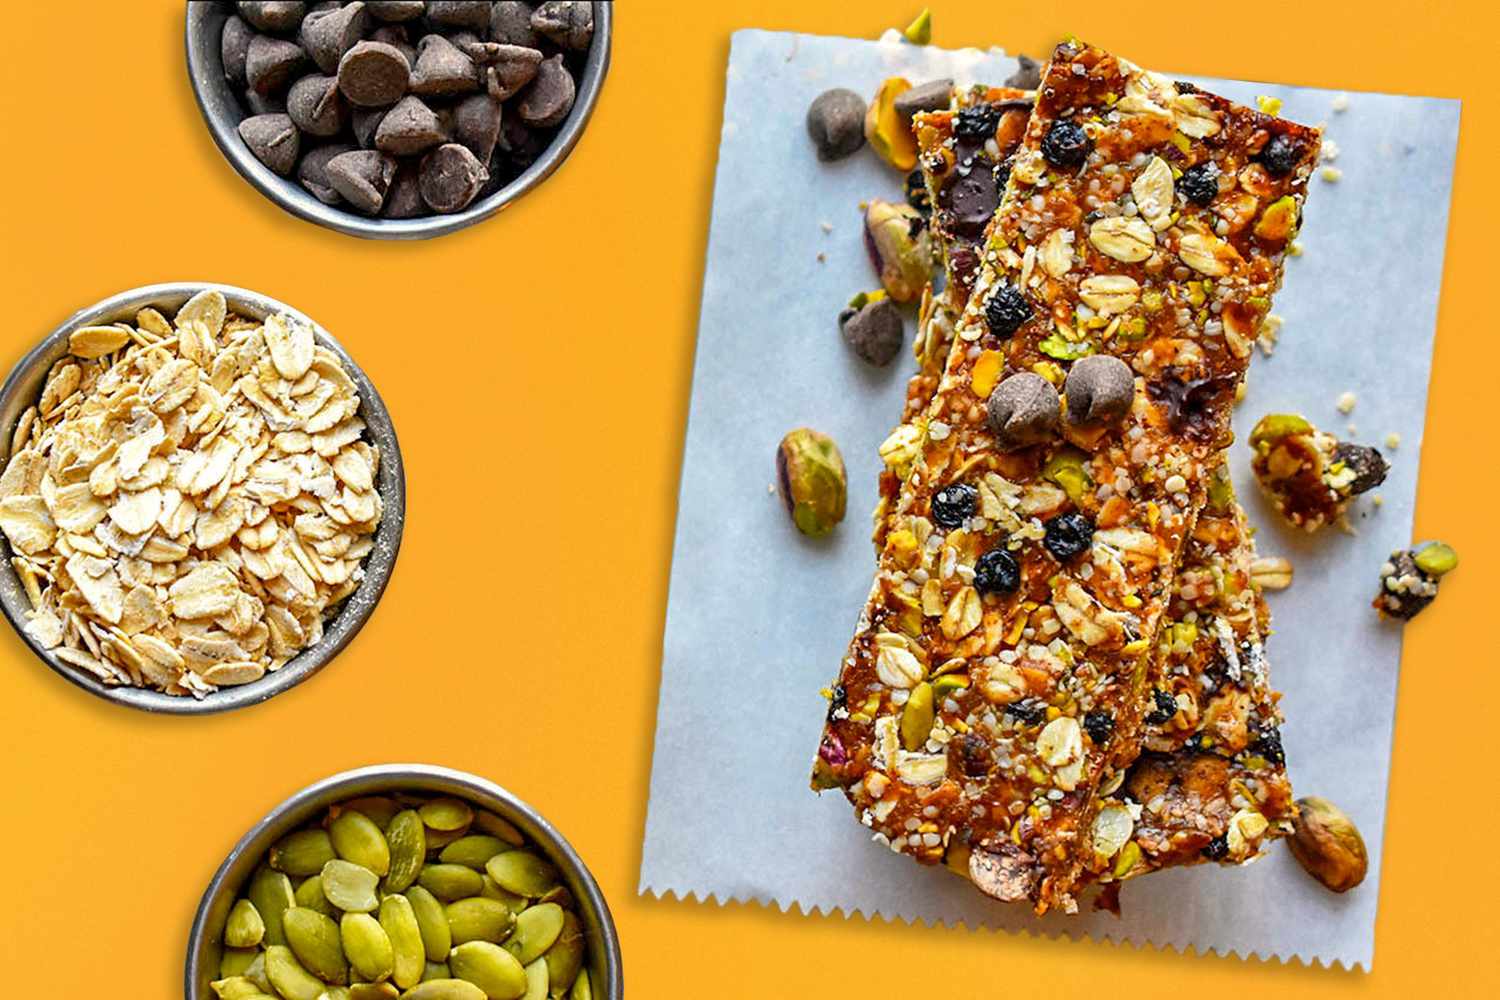 Overhead shot of homemade granola bars on parchment paper, surrounded by pistachios, oats, raisins and chocolate chips on an orange background